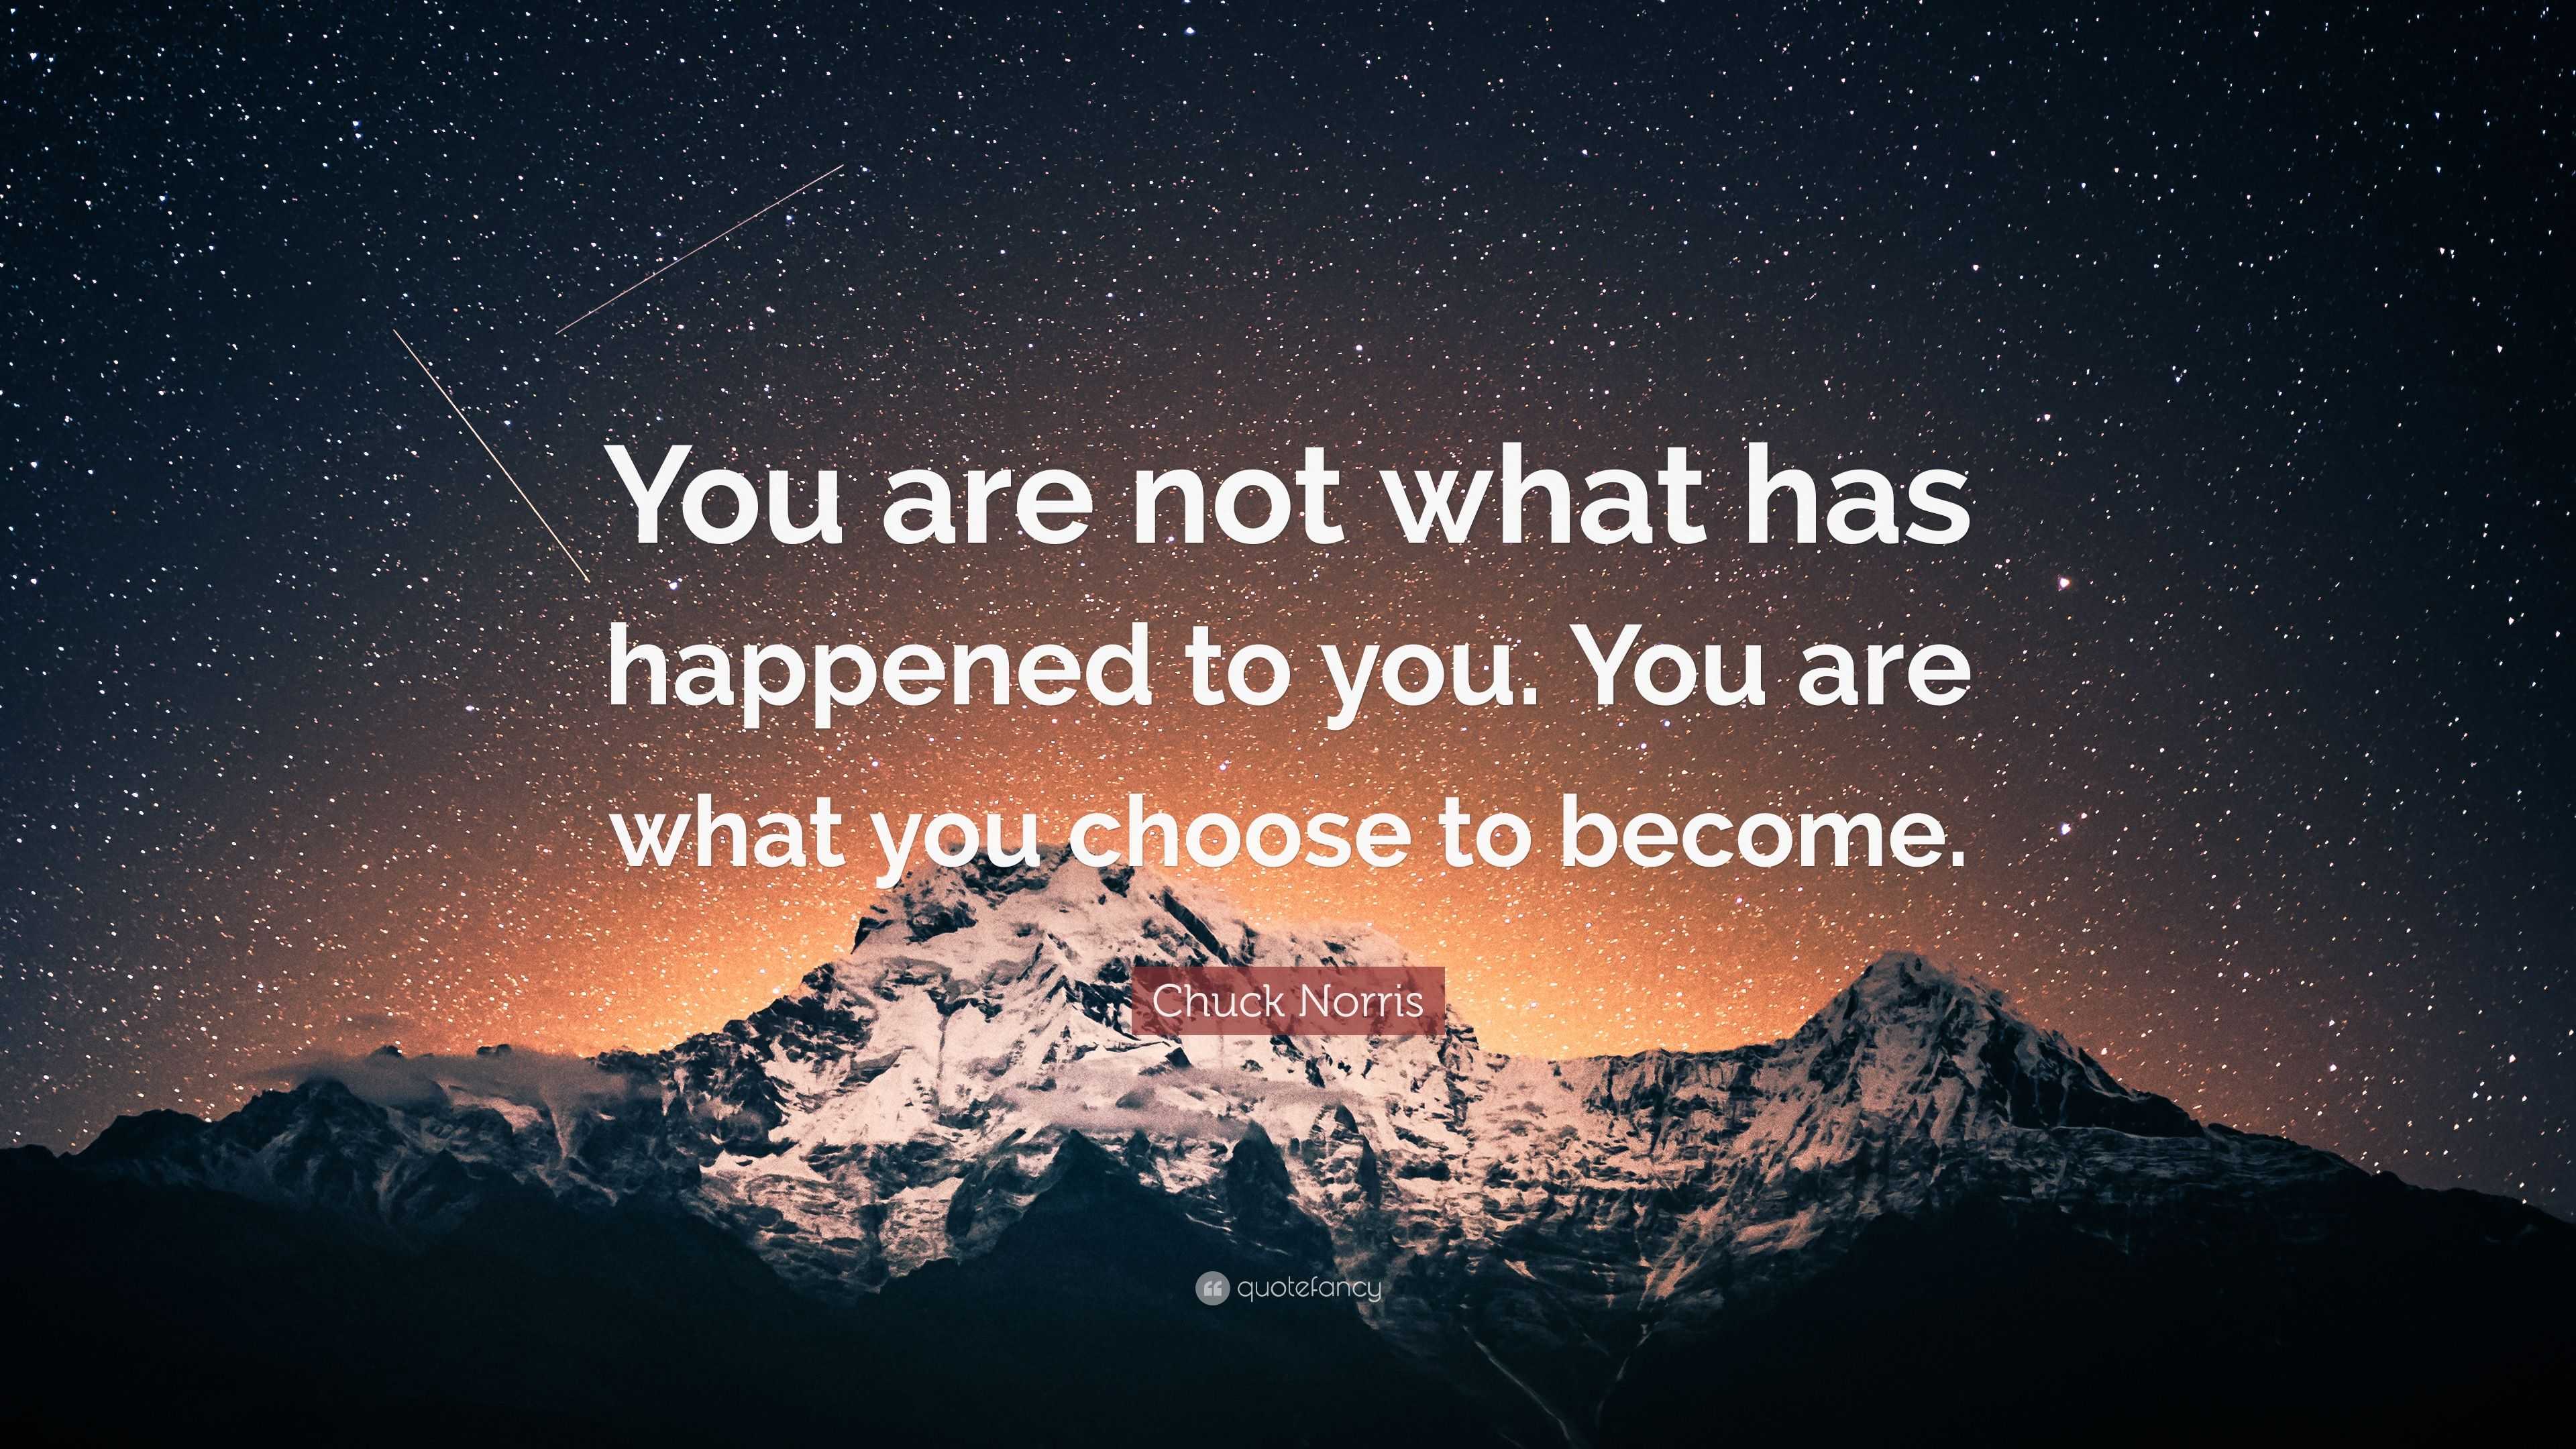 Chuck Norris Quote: “You are not what has happened to you. You are what ...